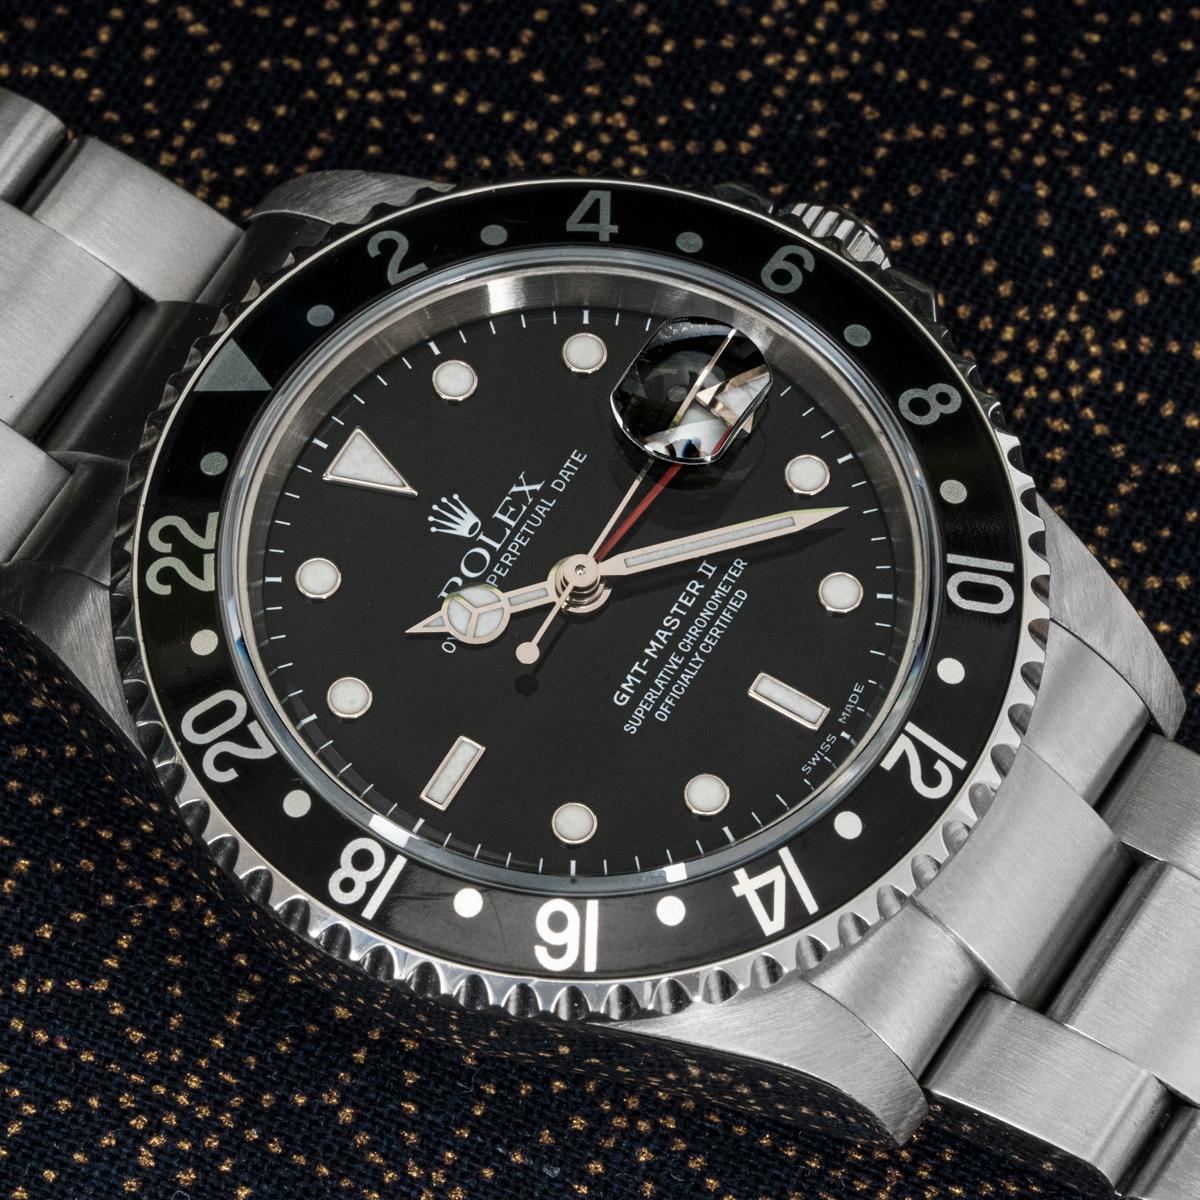 A stainless steel GMT-Master II by Rolex. Featuring a black dial with a date aperture as well as a red second-time zone hand. The bidirectional rotatable bezel also features a 24-hour display.

The watch is fitted with a sapphire crystal, a